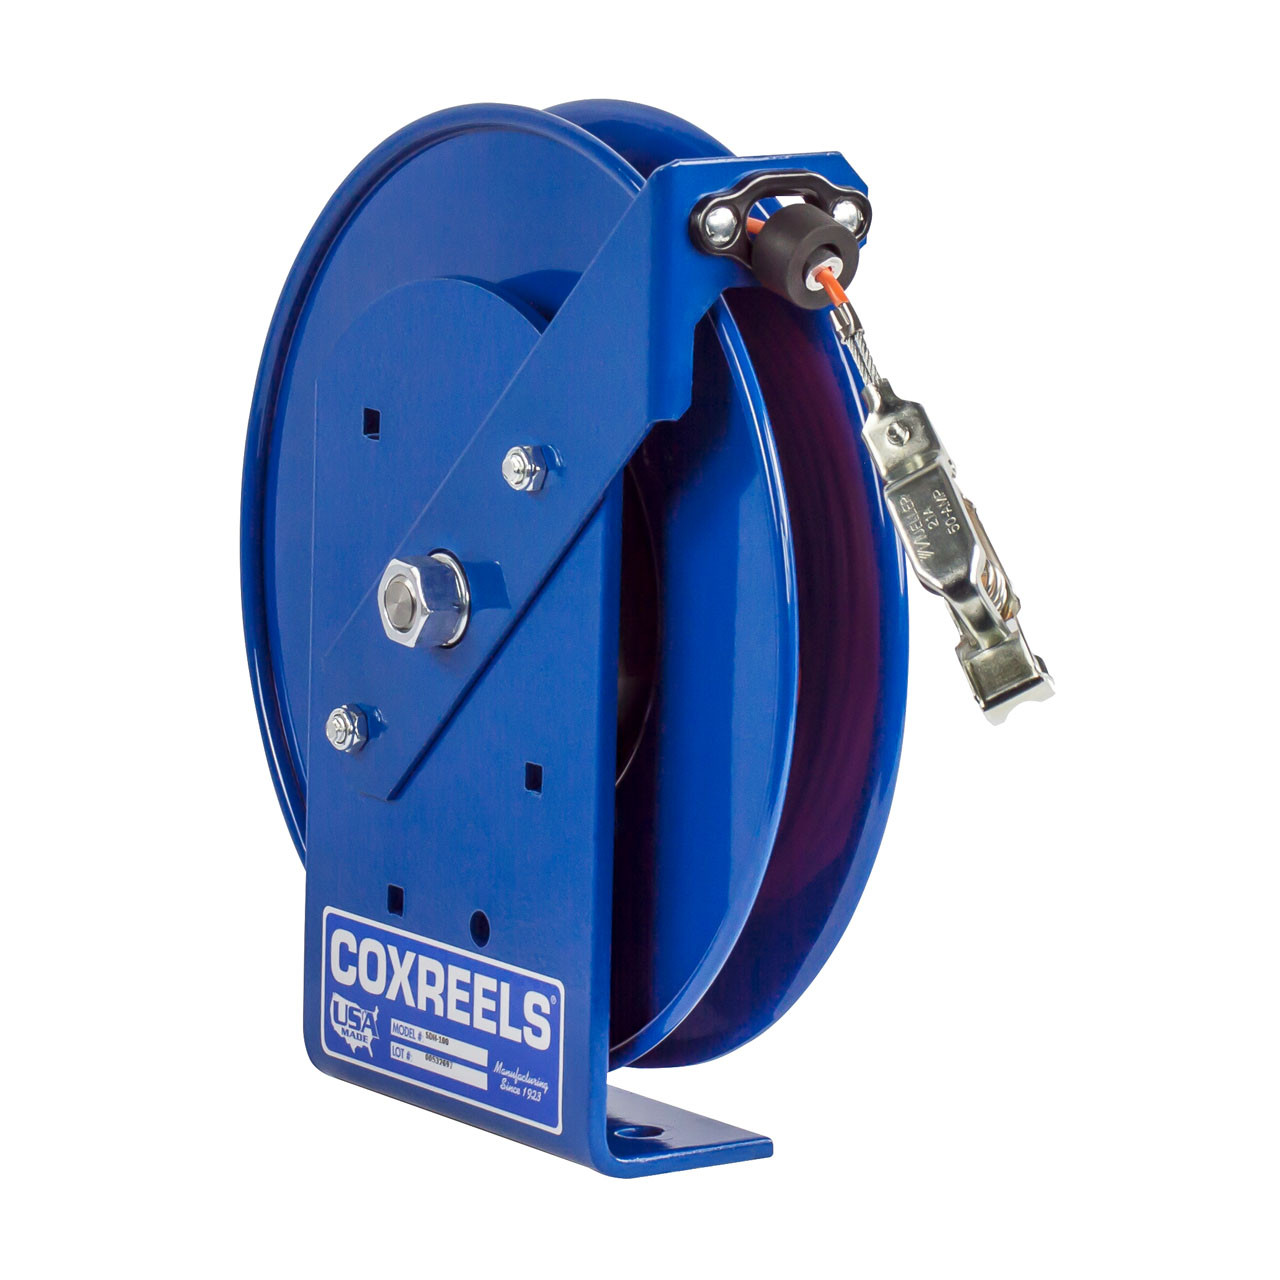 Coxreels SDH-200 Static Discharge Hand Crank Cable Reel: 200' Cable